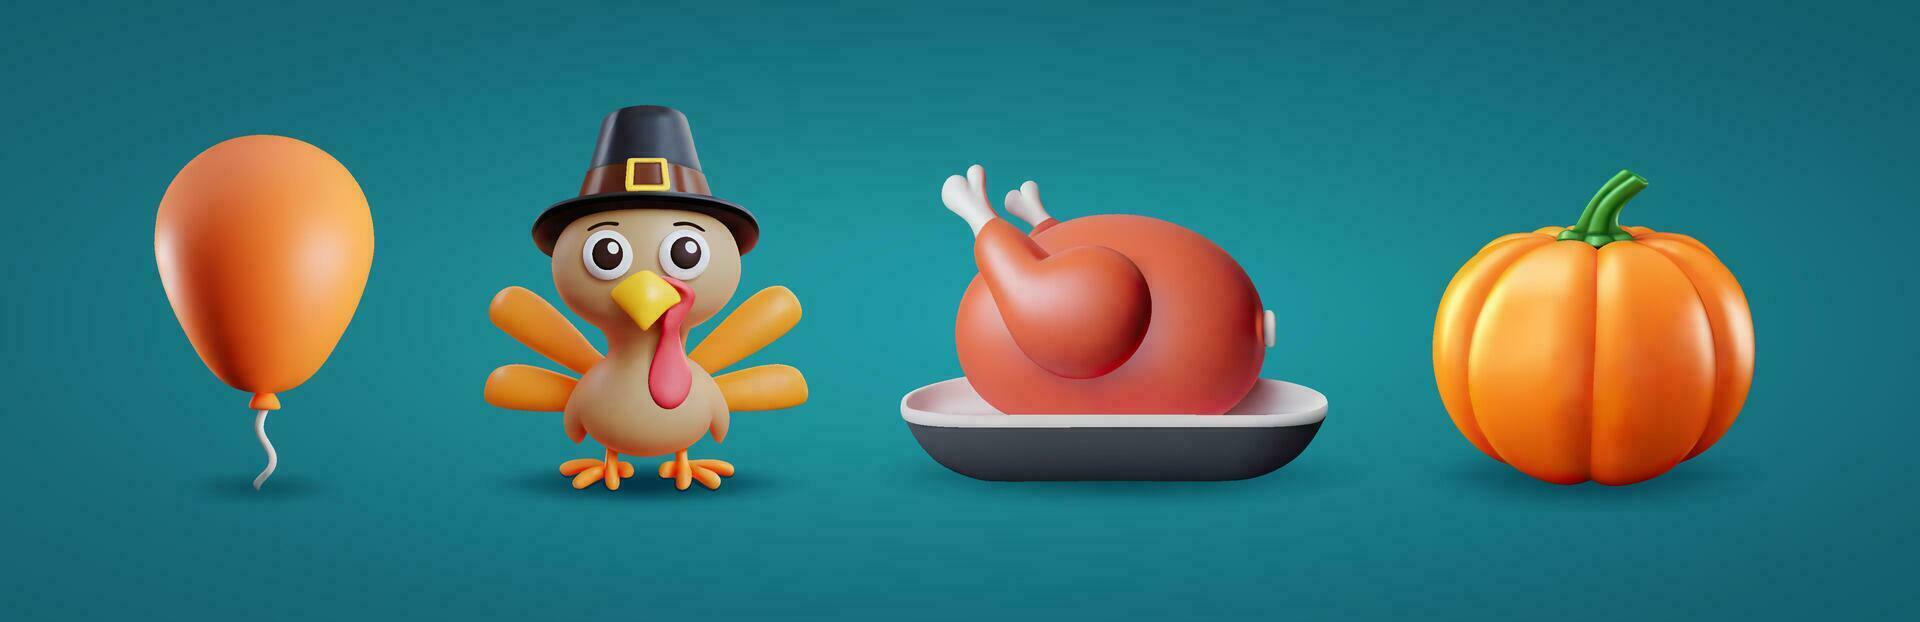 Thanksgiving 3D cartoon icons and objects. Thanksgiving vector illustrations set. 3D stickers collection. Cute Turkey character, roast turkey on a dish, air balloon and pumpkin.